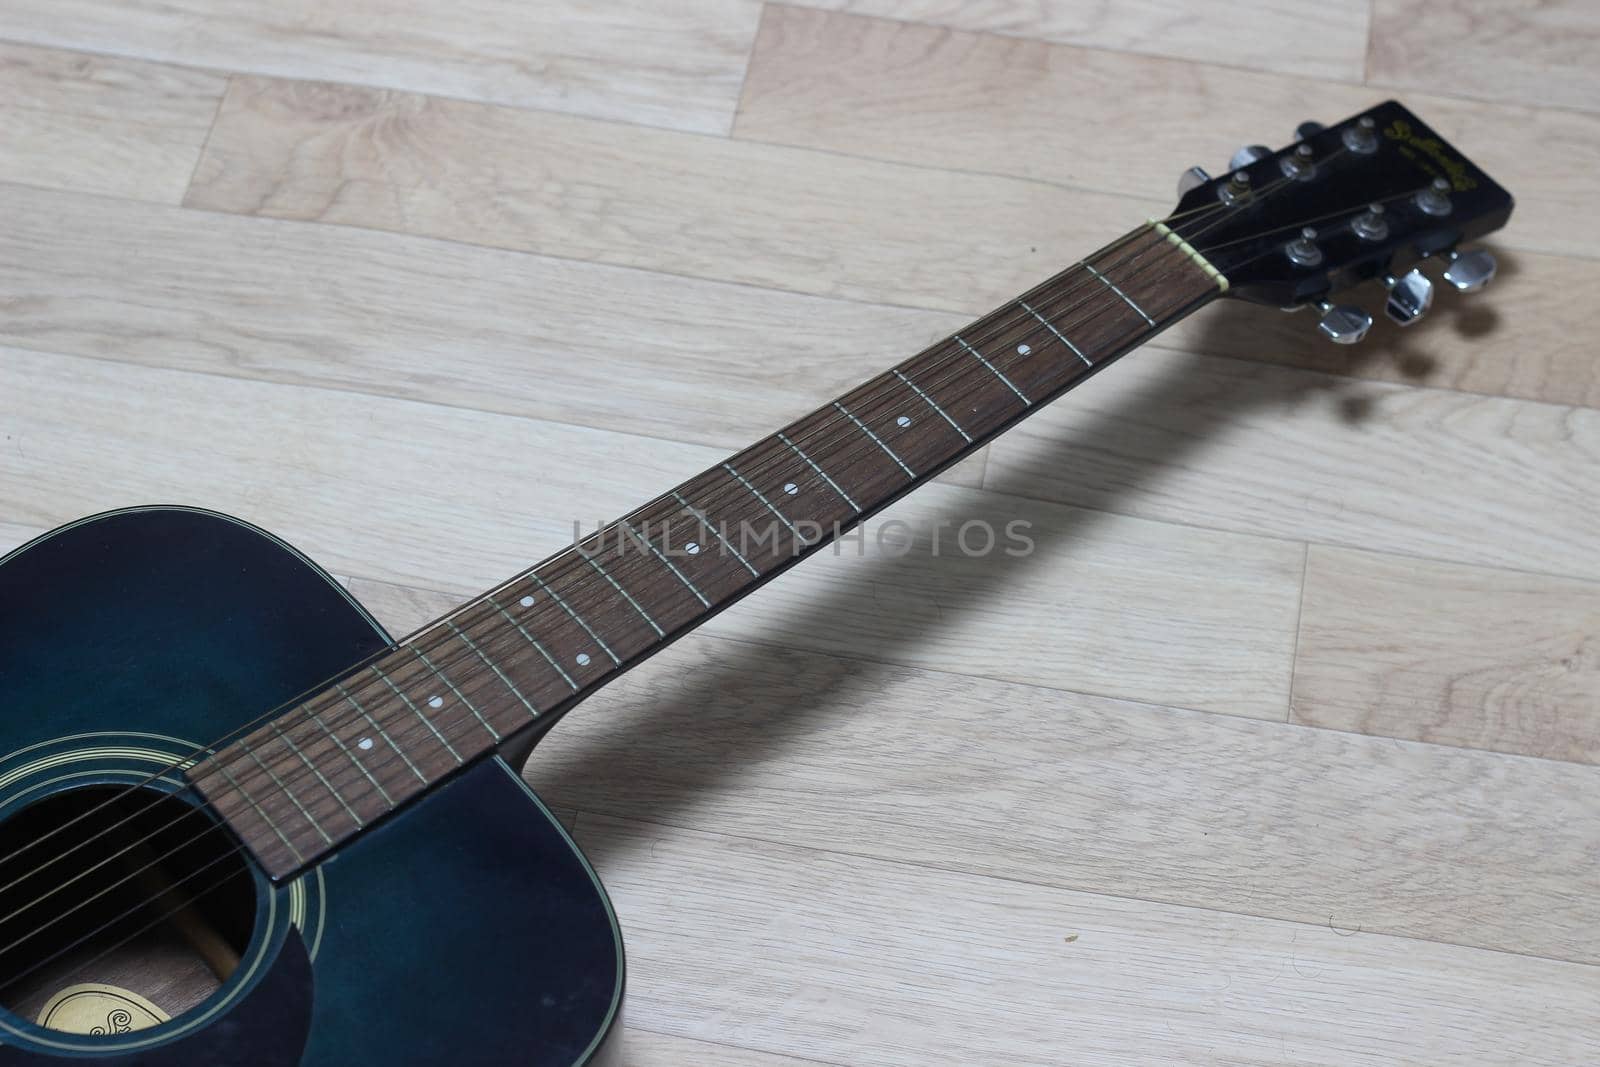 Close up of music guitar. Acoustic guitar with strings on a wooden floor